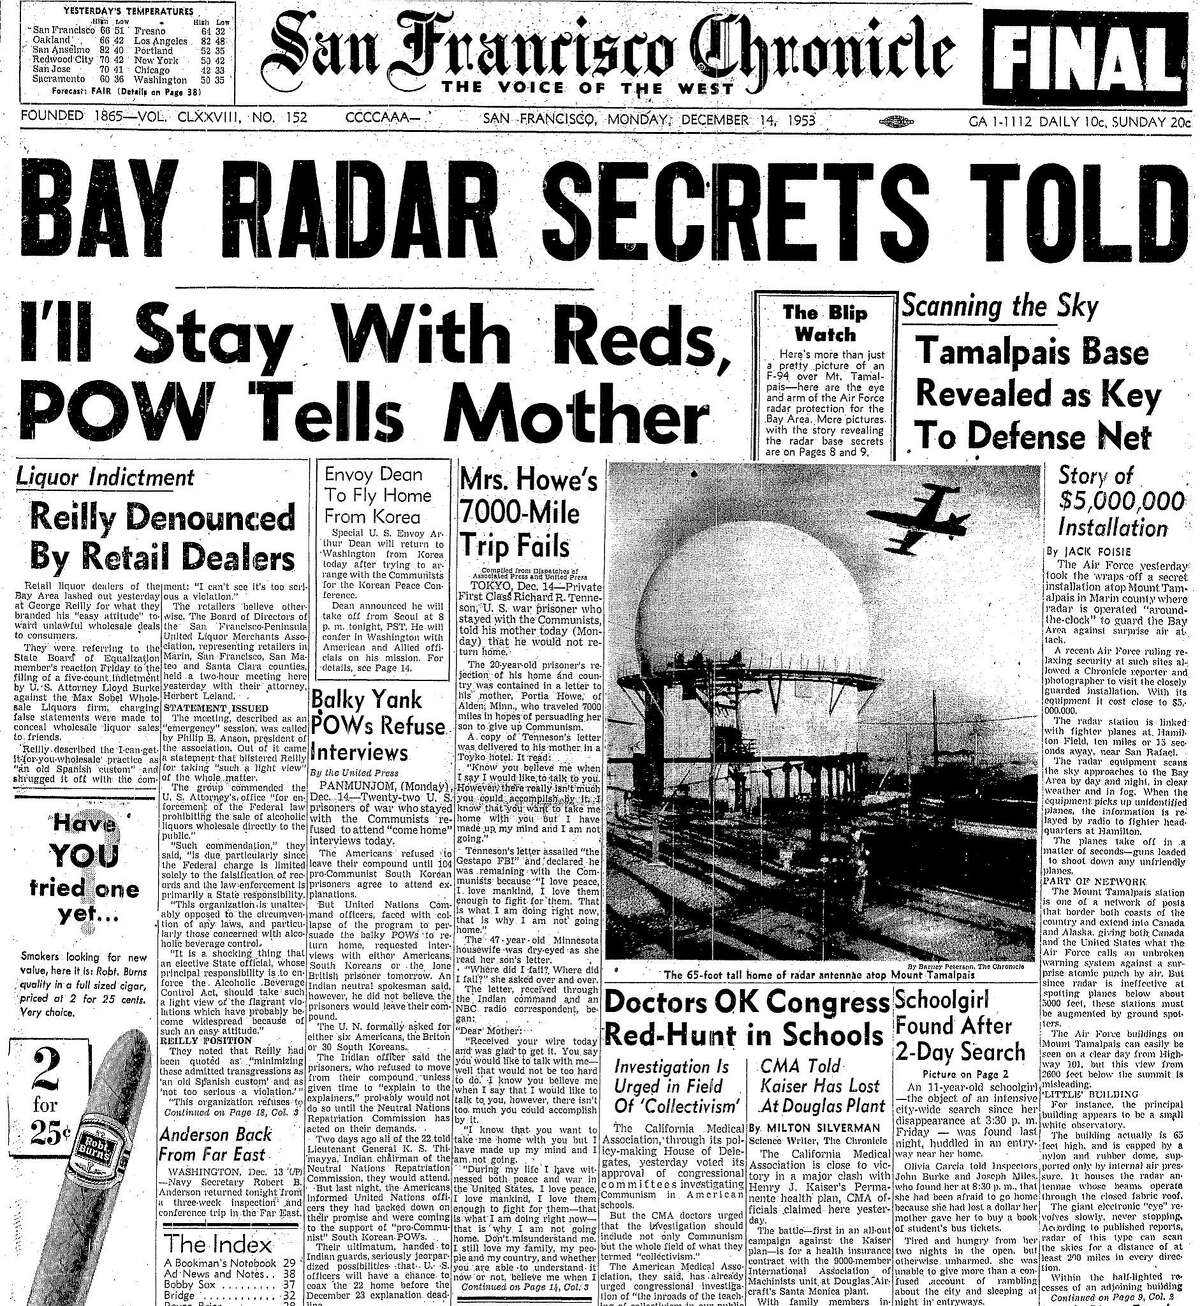 The December 14, 1953 Chronicle front dramatically reports on the "secret" military base on top of Mount Tamalpais